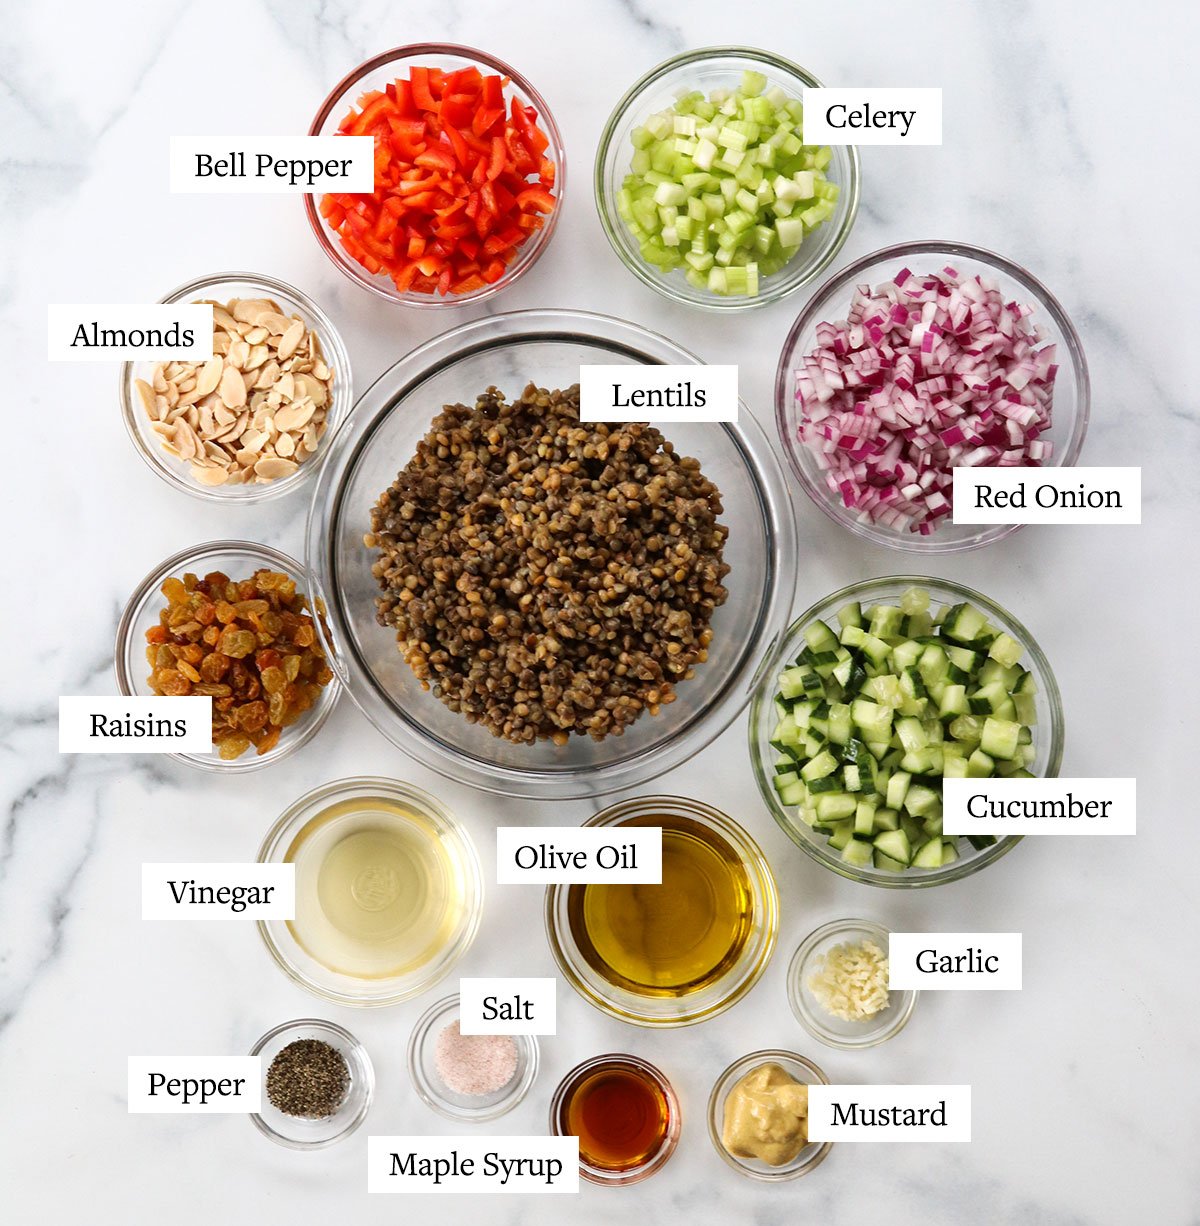 Lentil salad ingredients labeled in glass bowls on a white surface.